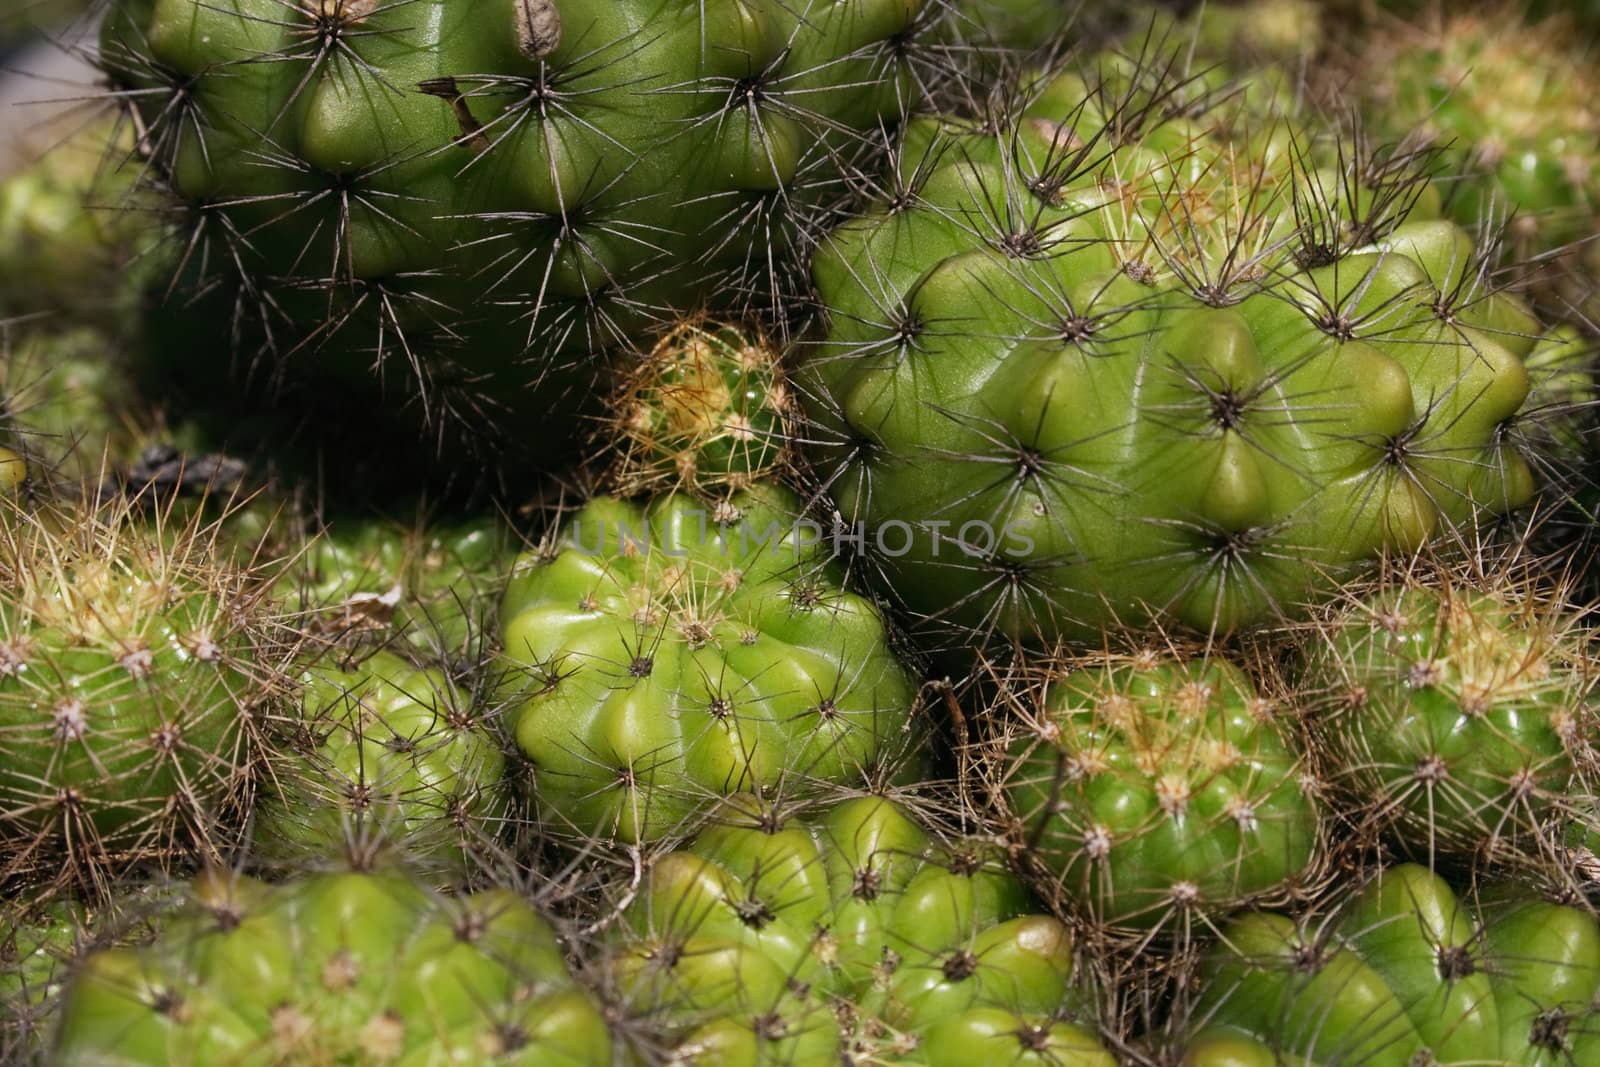 A group of cactus that can use as background in design